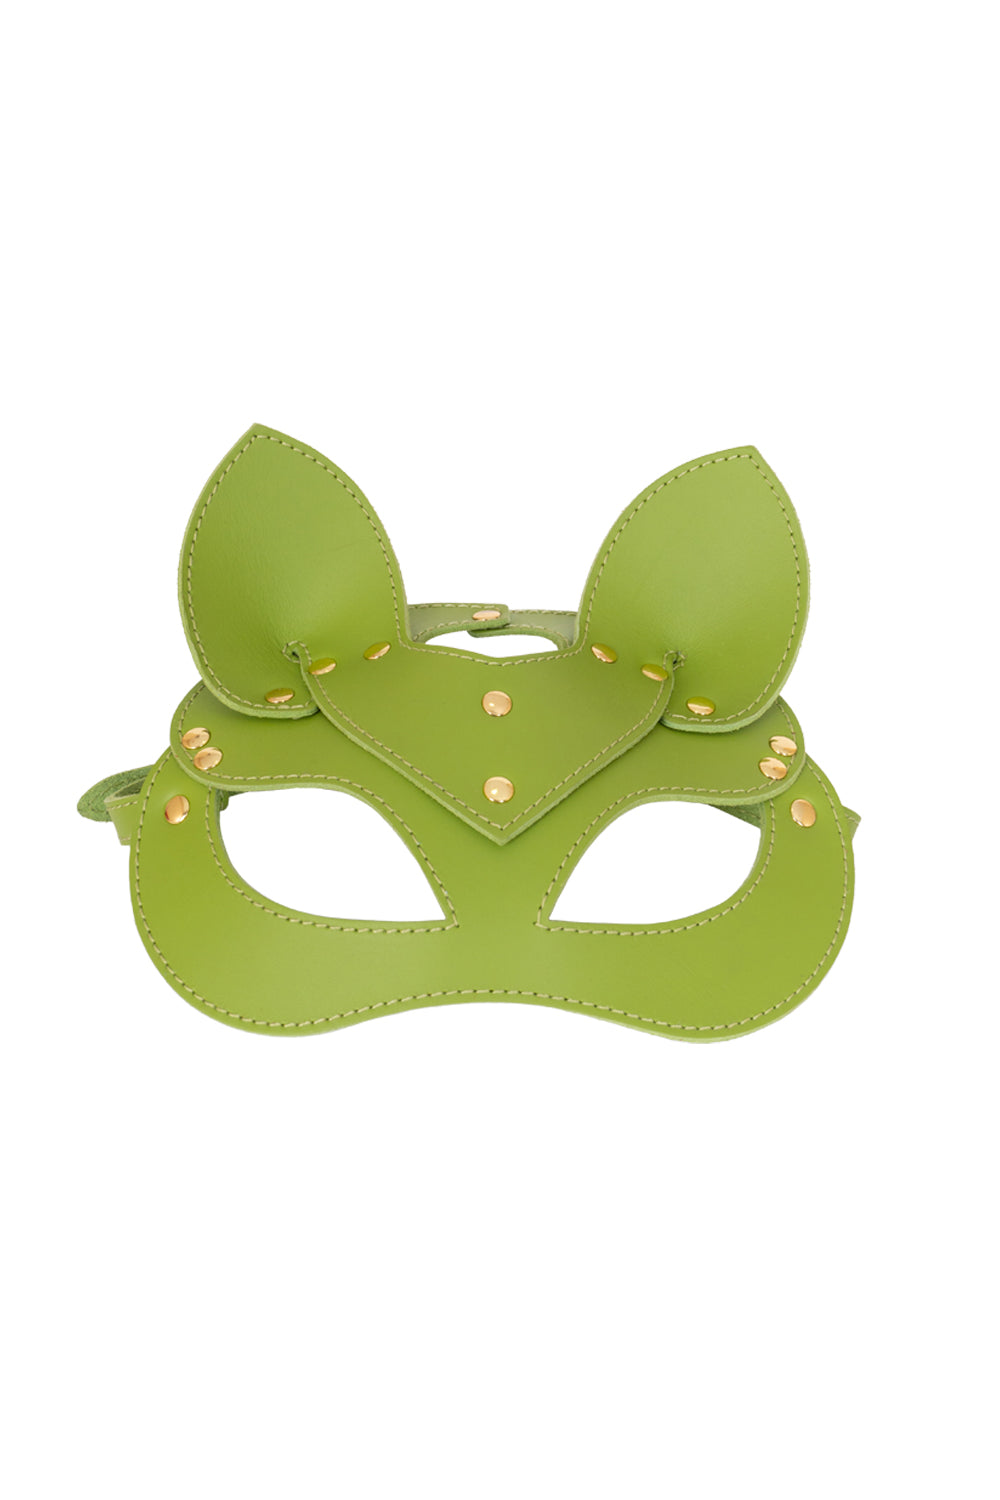 Leather сat mask, kitty fetish mask. Green